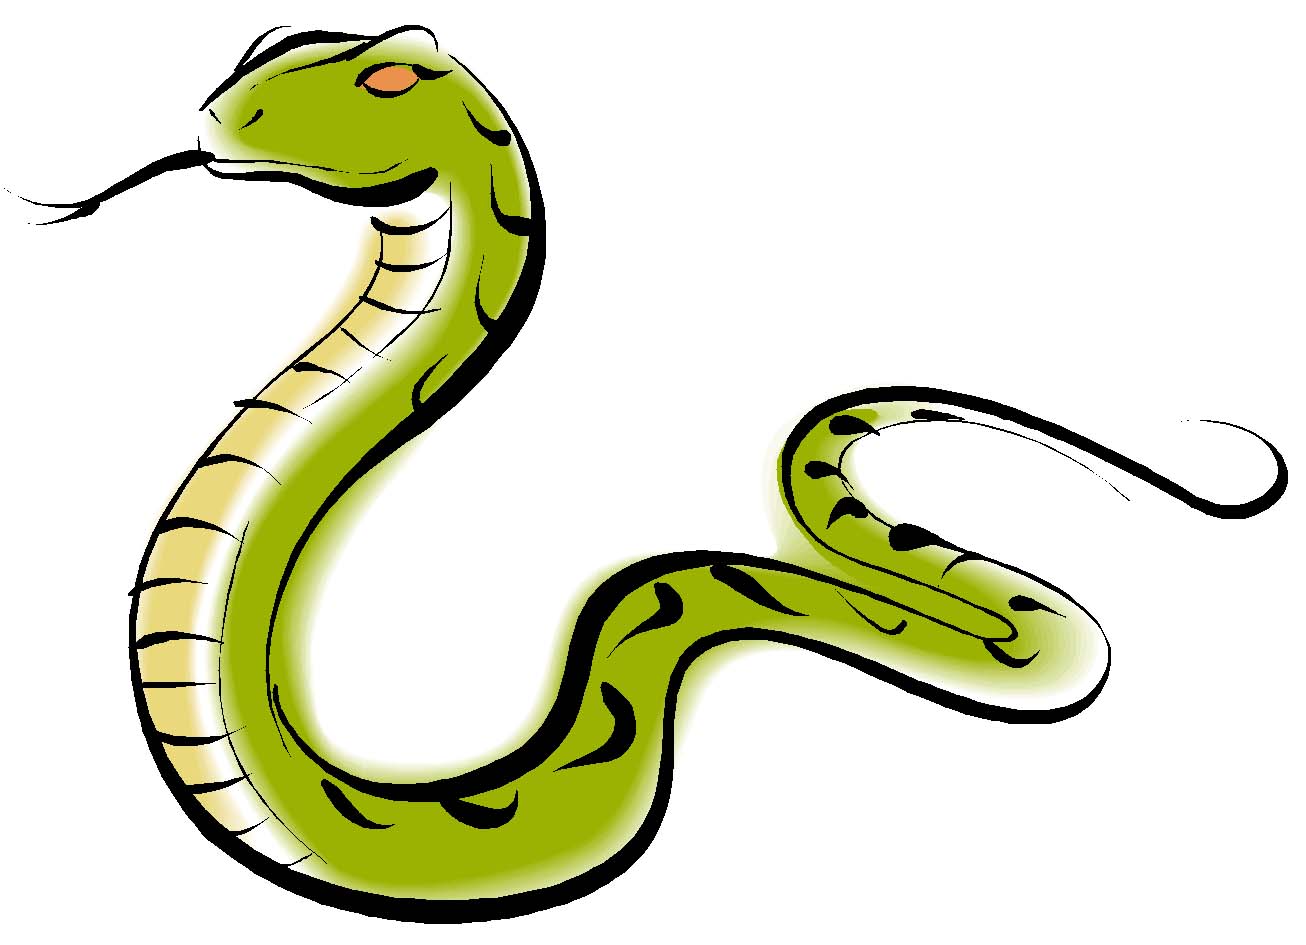 Snake Drawing 20907 Hd Wallpapers in Animals - Imagesci.